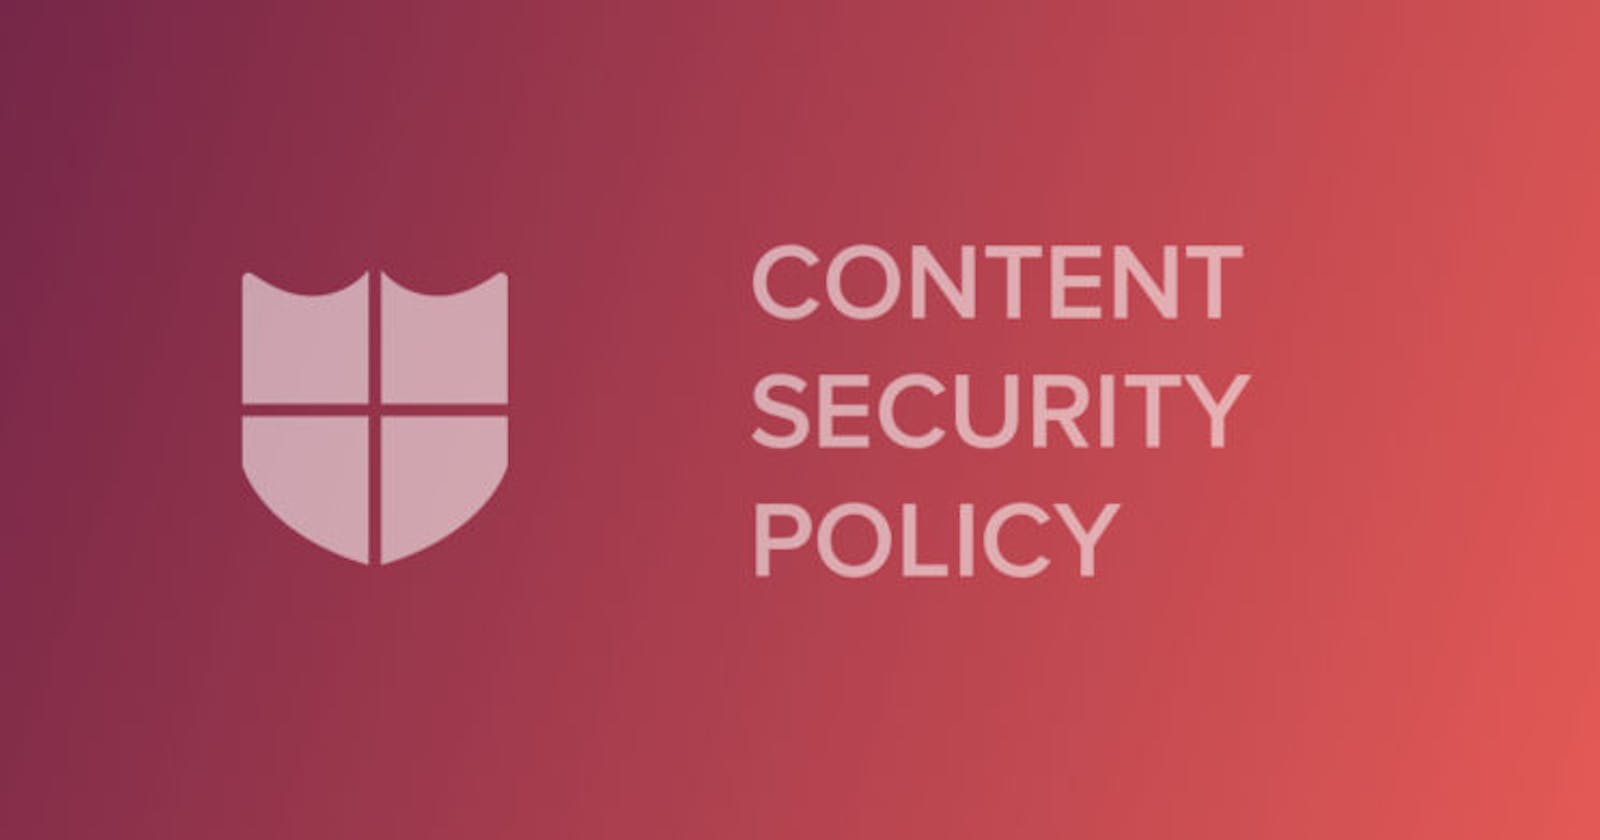 Content Security Policy has never been simpler - Sqreen Blog | Application Security For Developers